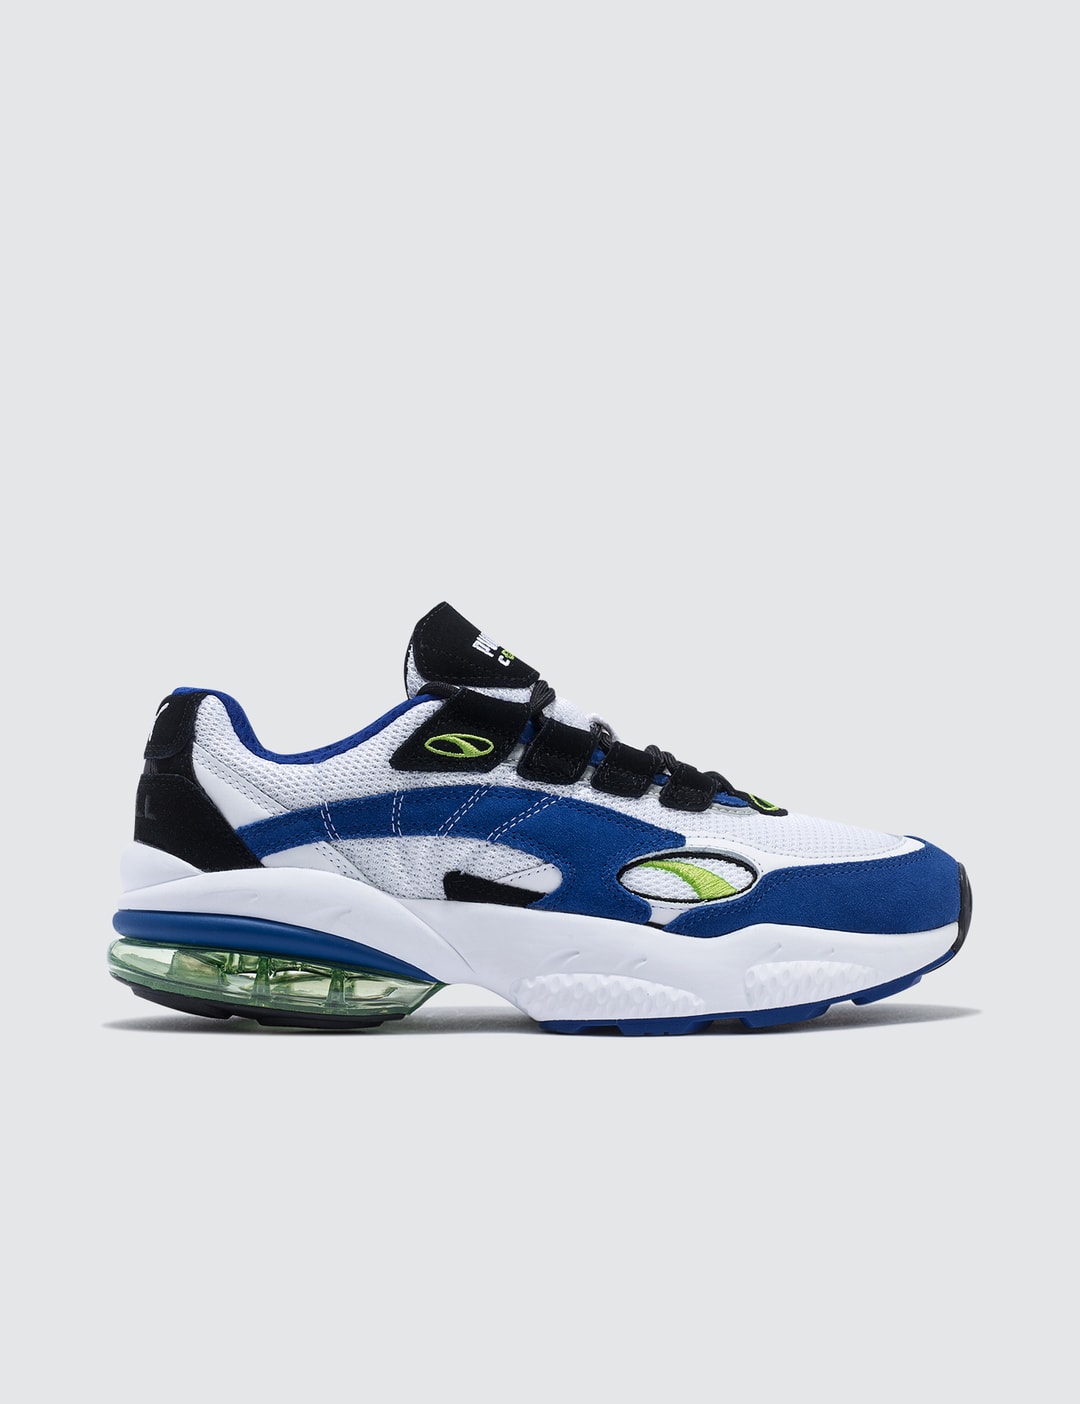 Puma - One Piece X Puma Cell Venom Sneaker  HBX - Globally Curated Fashion  and Lifestyle by Hypebeast